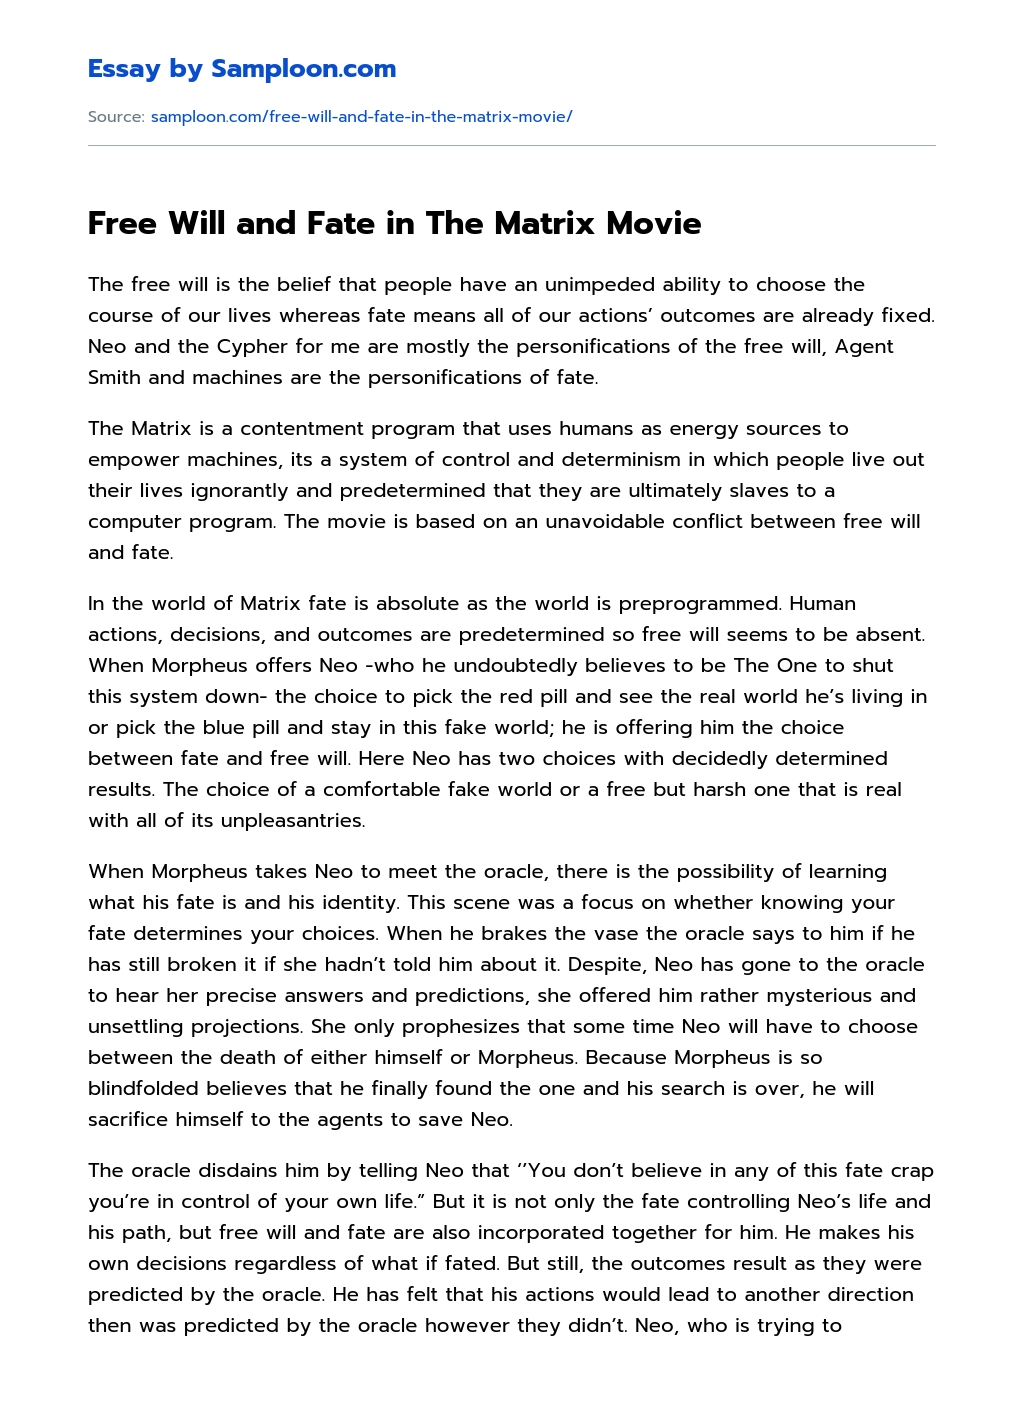 Free Will and Fate in The Matrix Movie Film Analysis essay